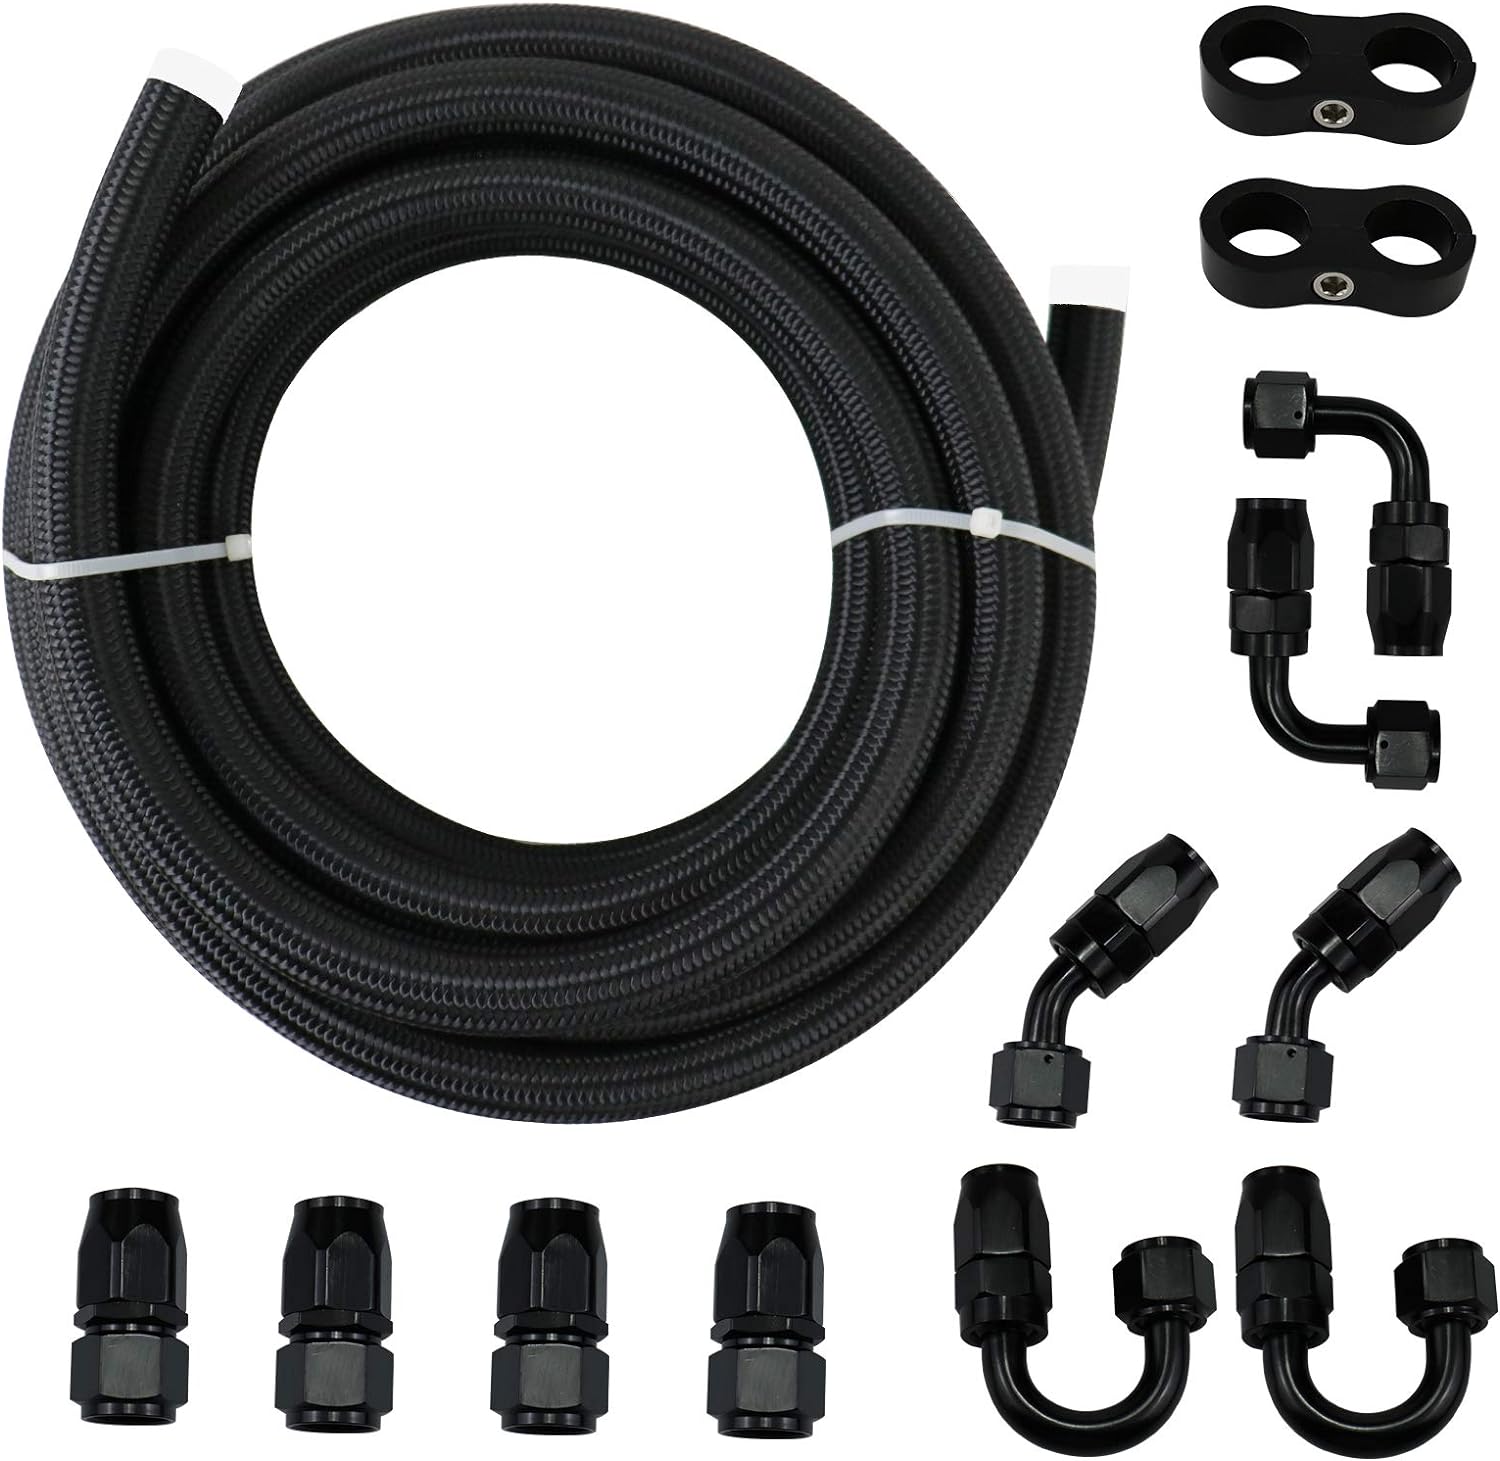 3/8 5/8 Braided Fuel line Kit Oil/Gas/Fuel Hose Line Hose End Fitting Adapter